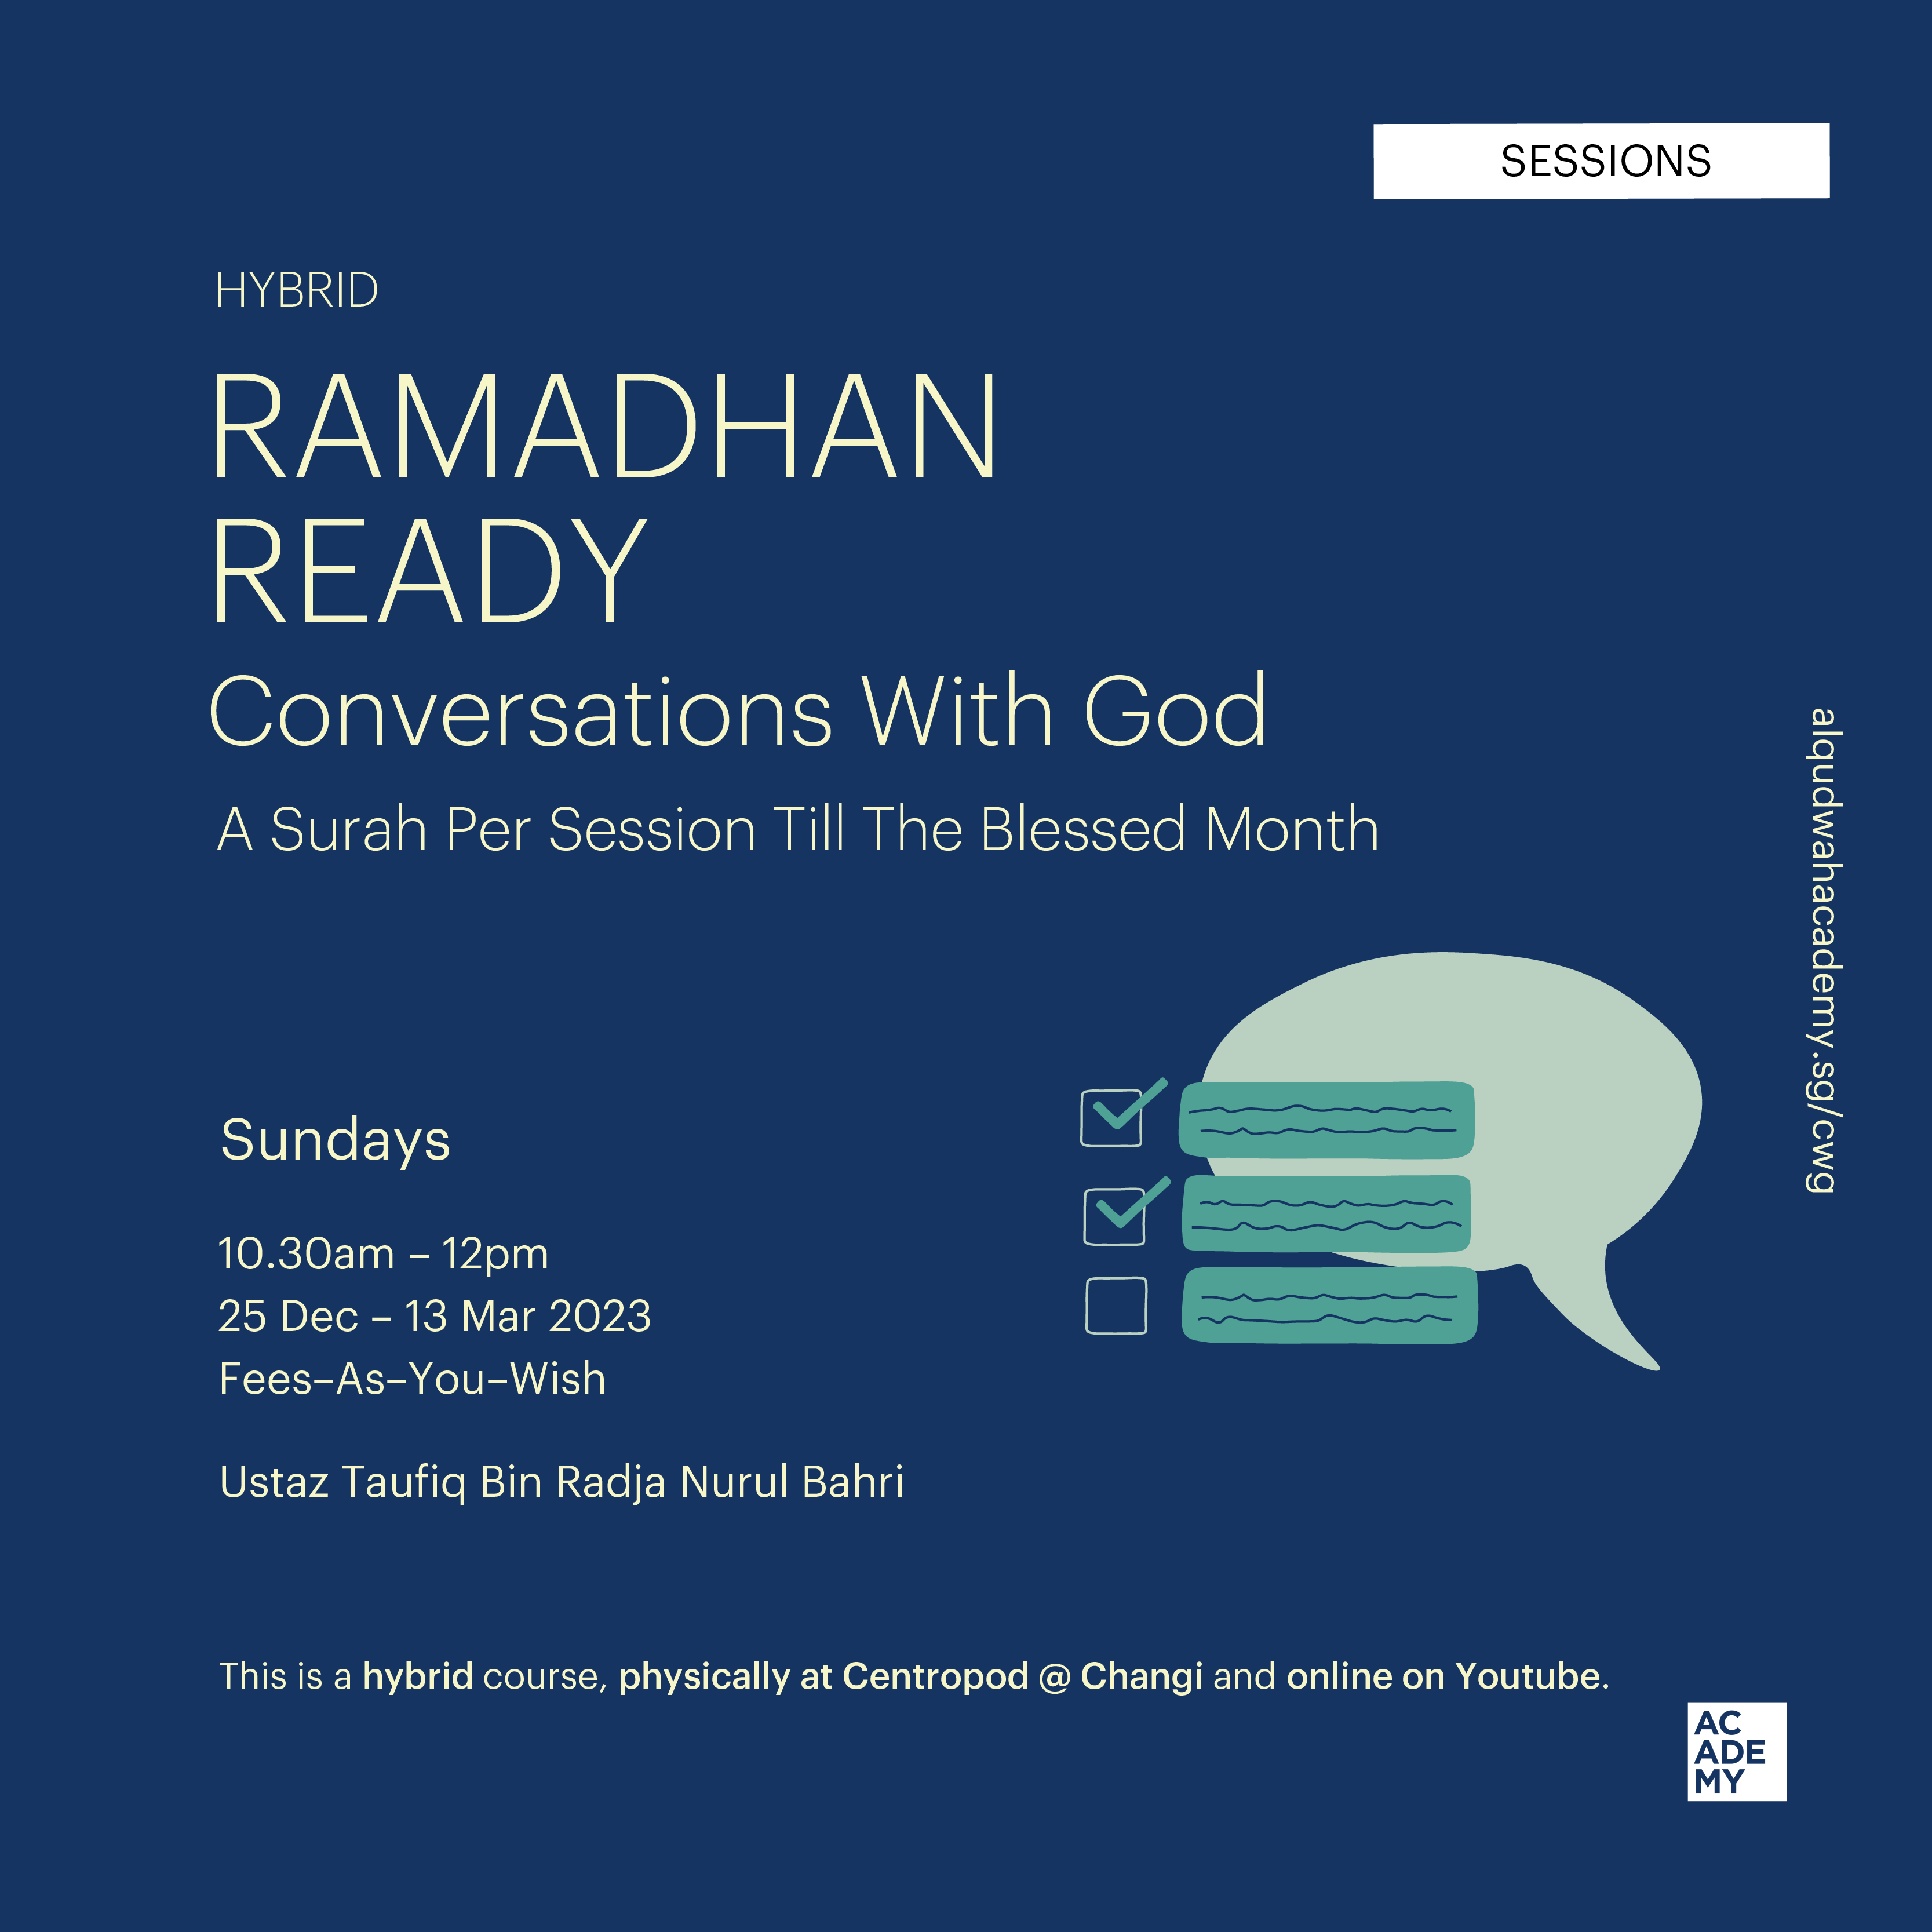 RAMADHAN READY: A SURAH<br />
PER SESSION TILL THE BLESSED<br />
MONTH